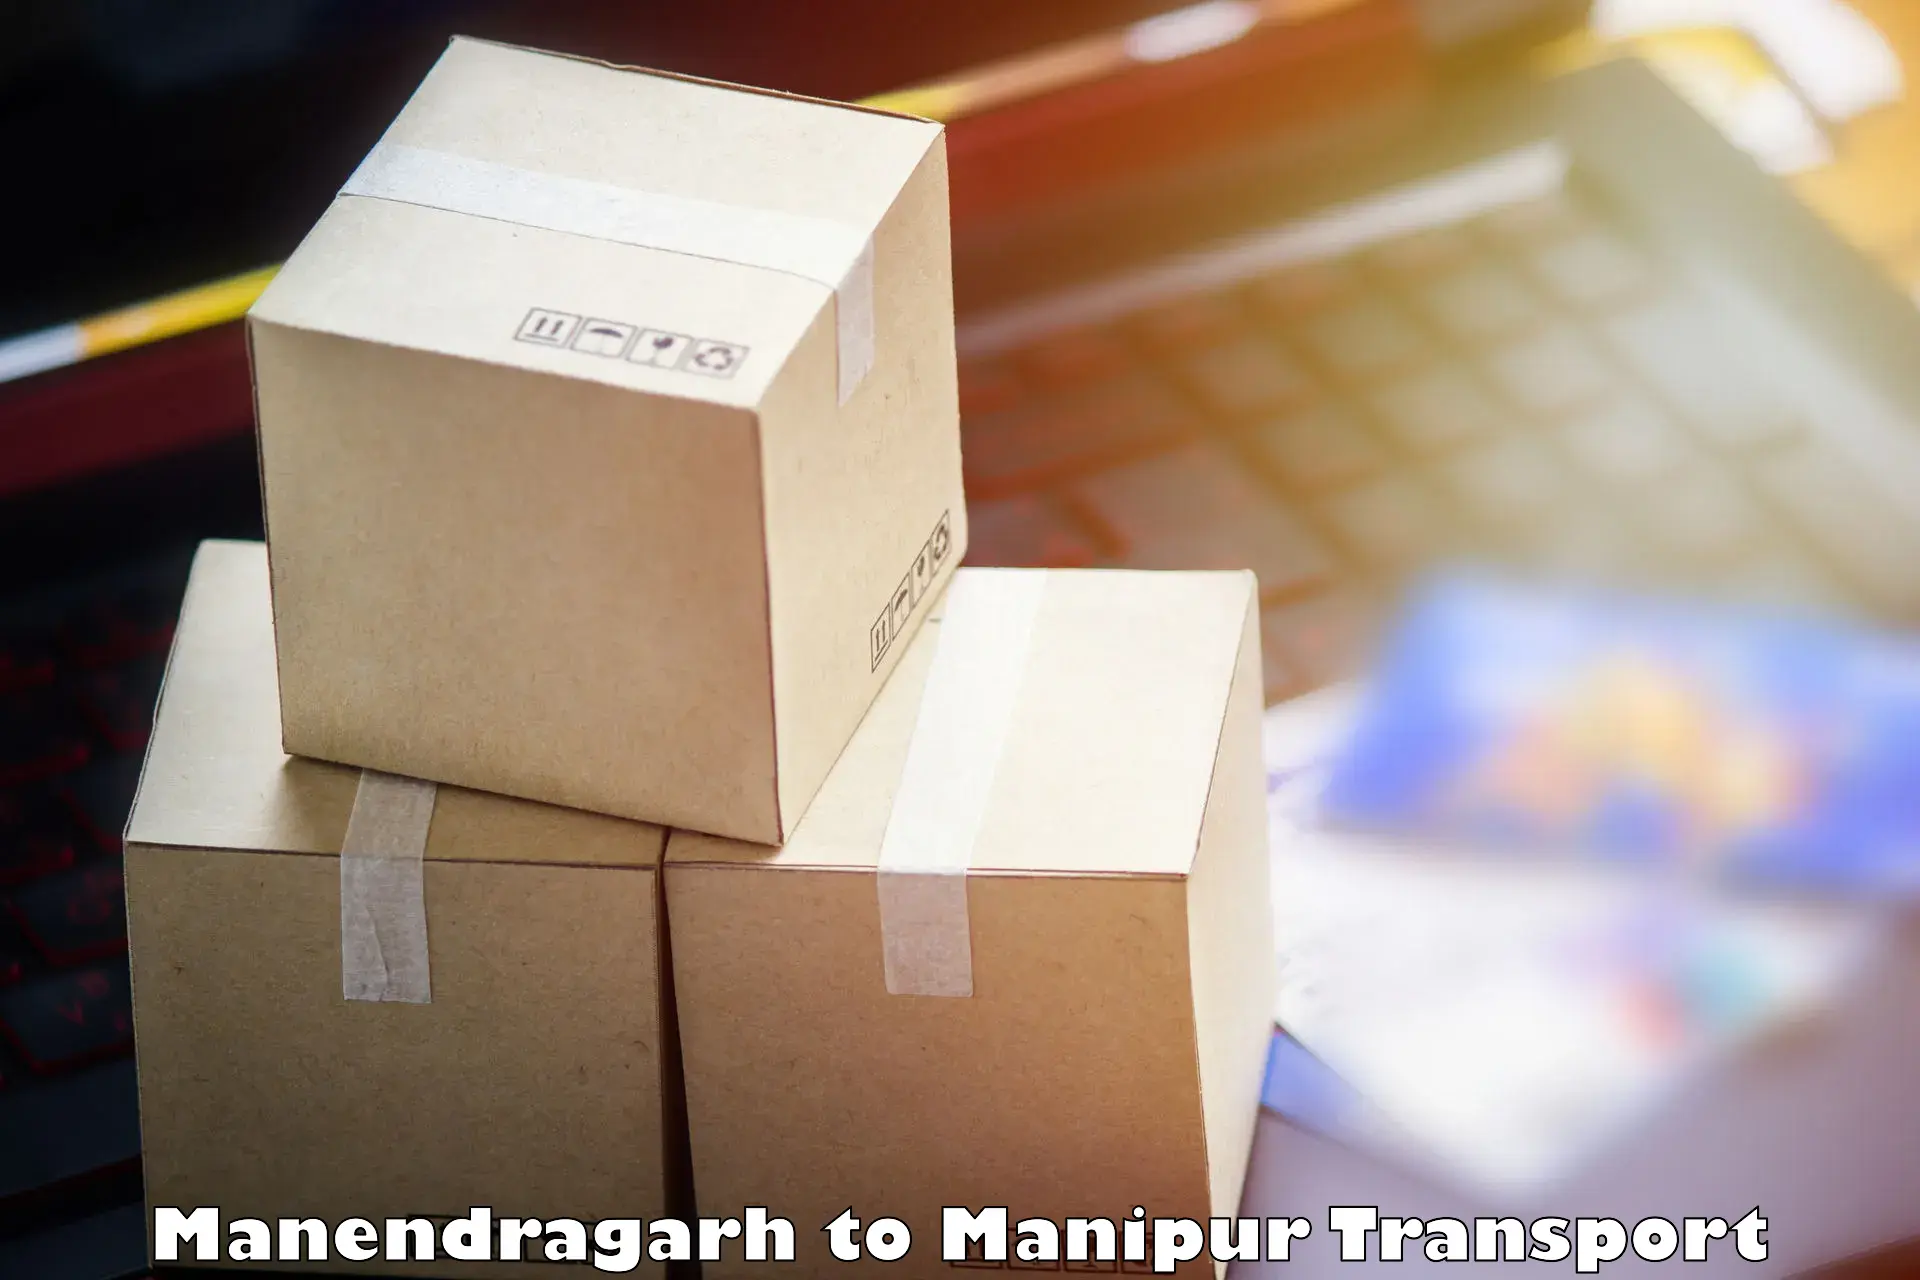 Shipping services Manendragarh to Manipur